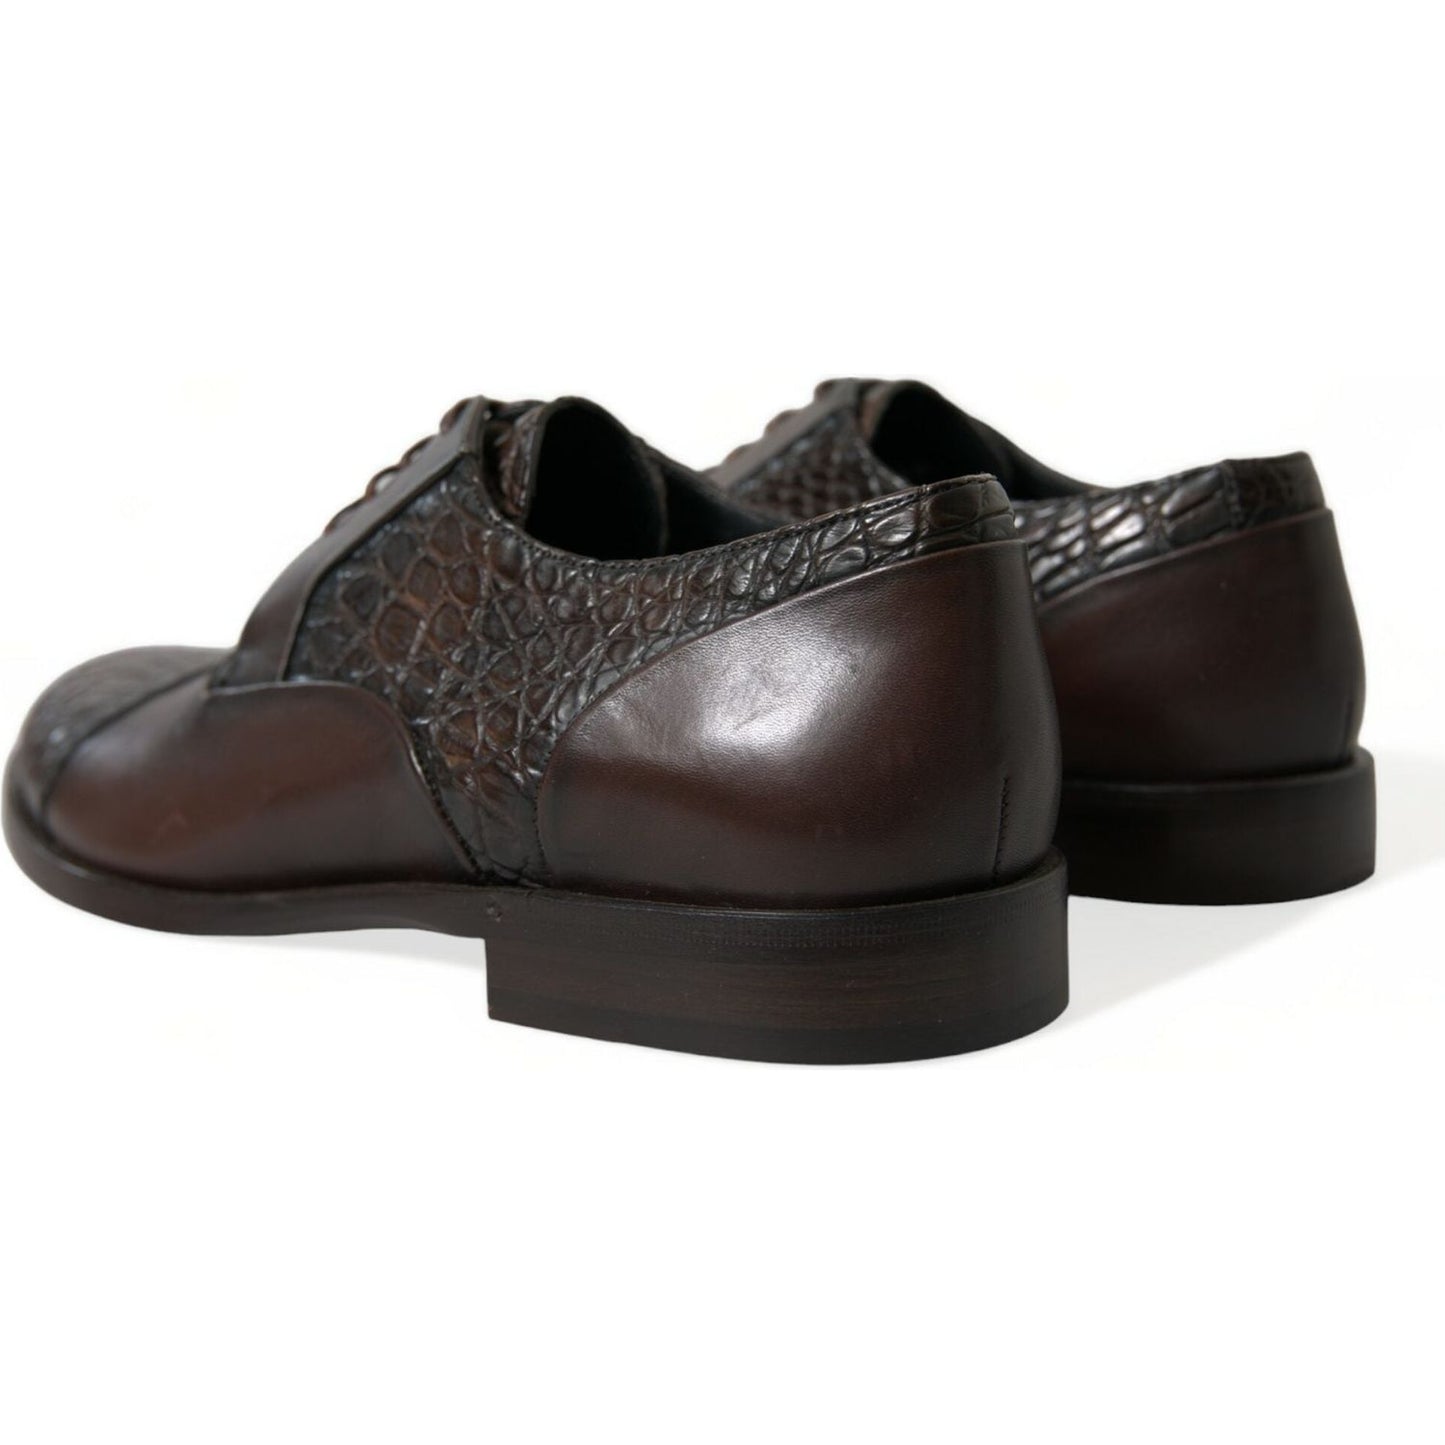 Dolce & Gabbana Elegant Textured Leather Oxford Dress Shoes brown-exotic-leather-lace-up-oxford-dress-shoes